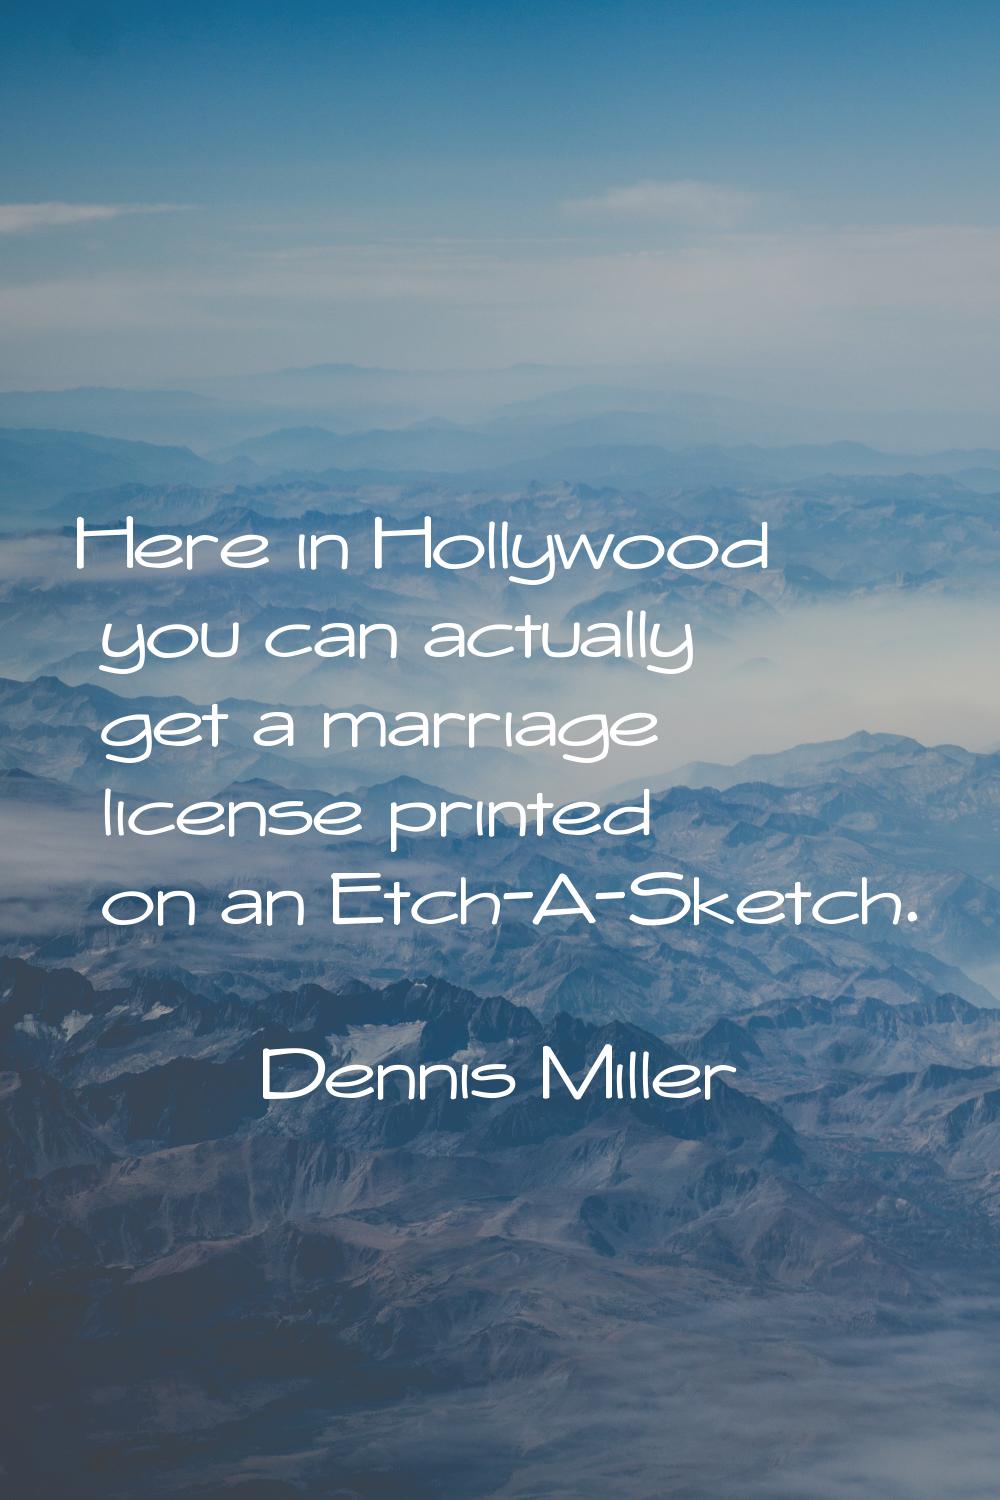 Here in Hollywood you can actually get a marriage license printed on an Etch-A-Sketch.